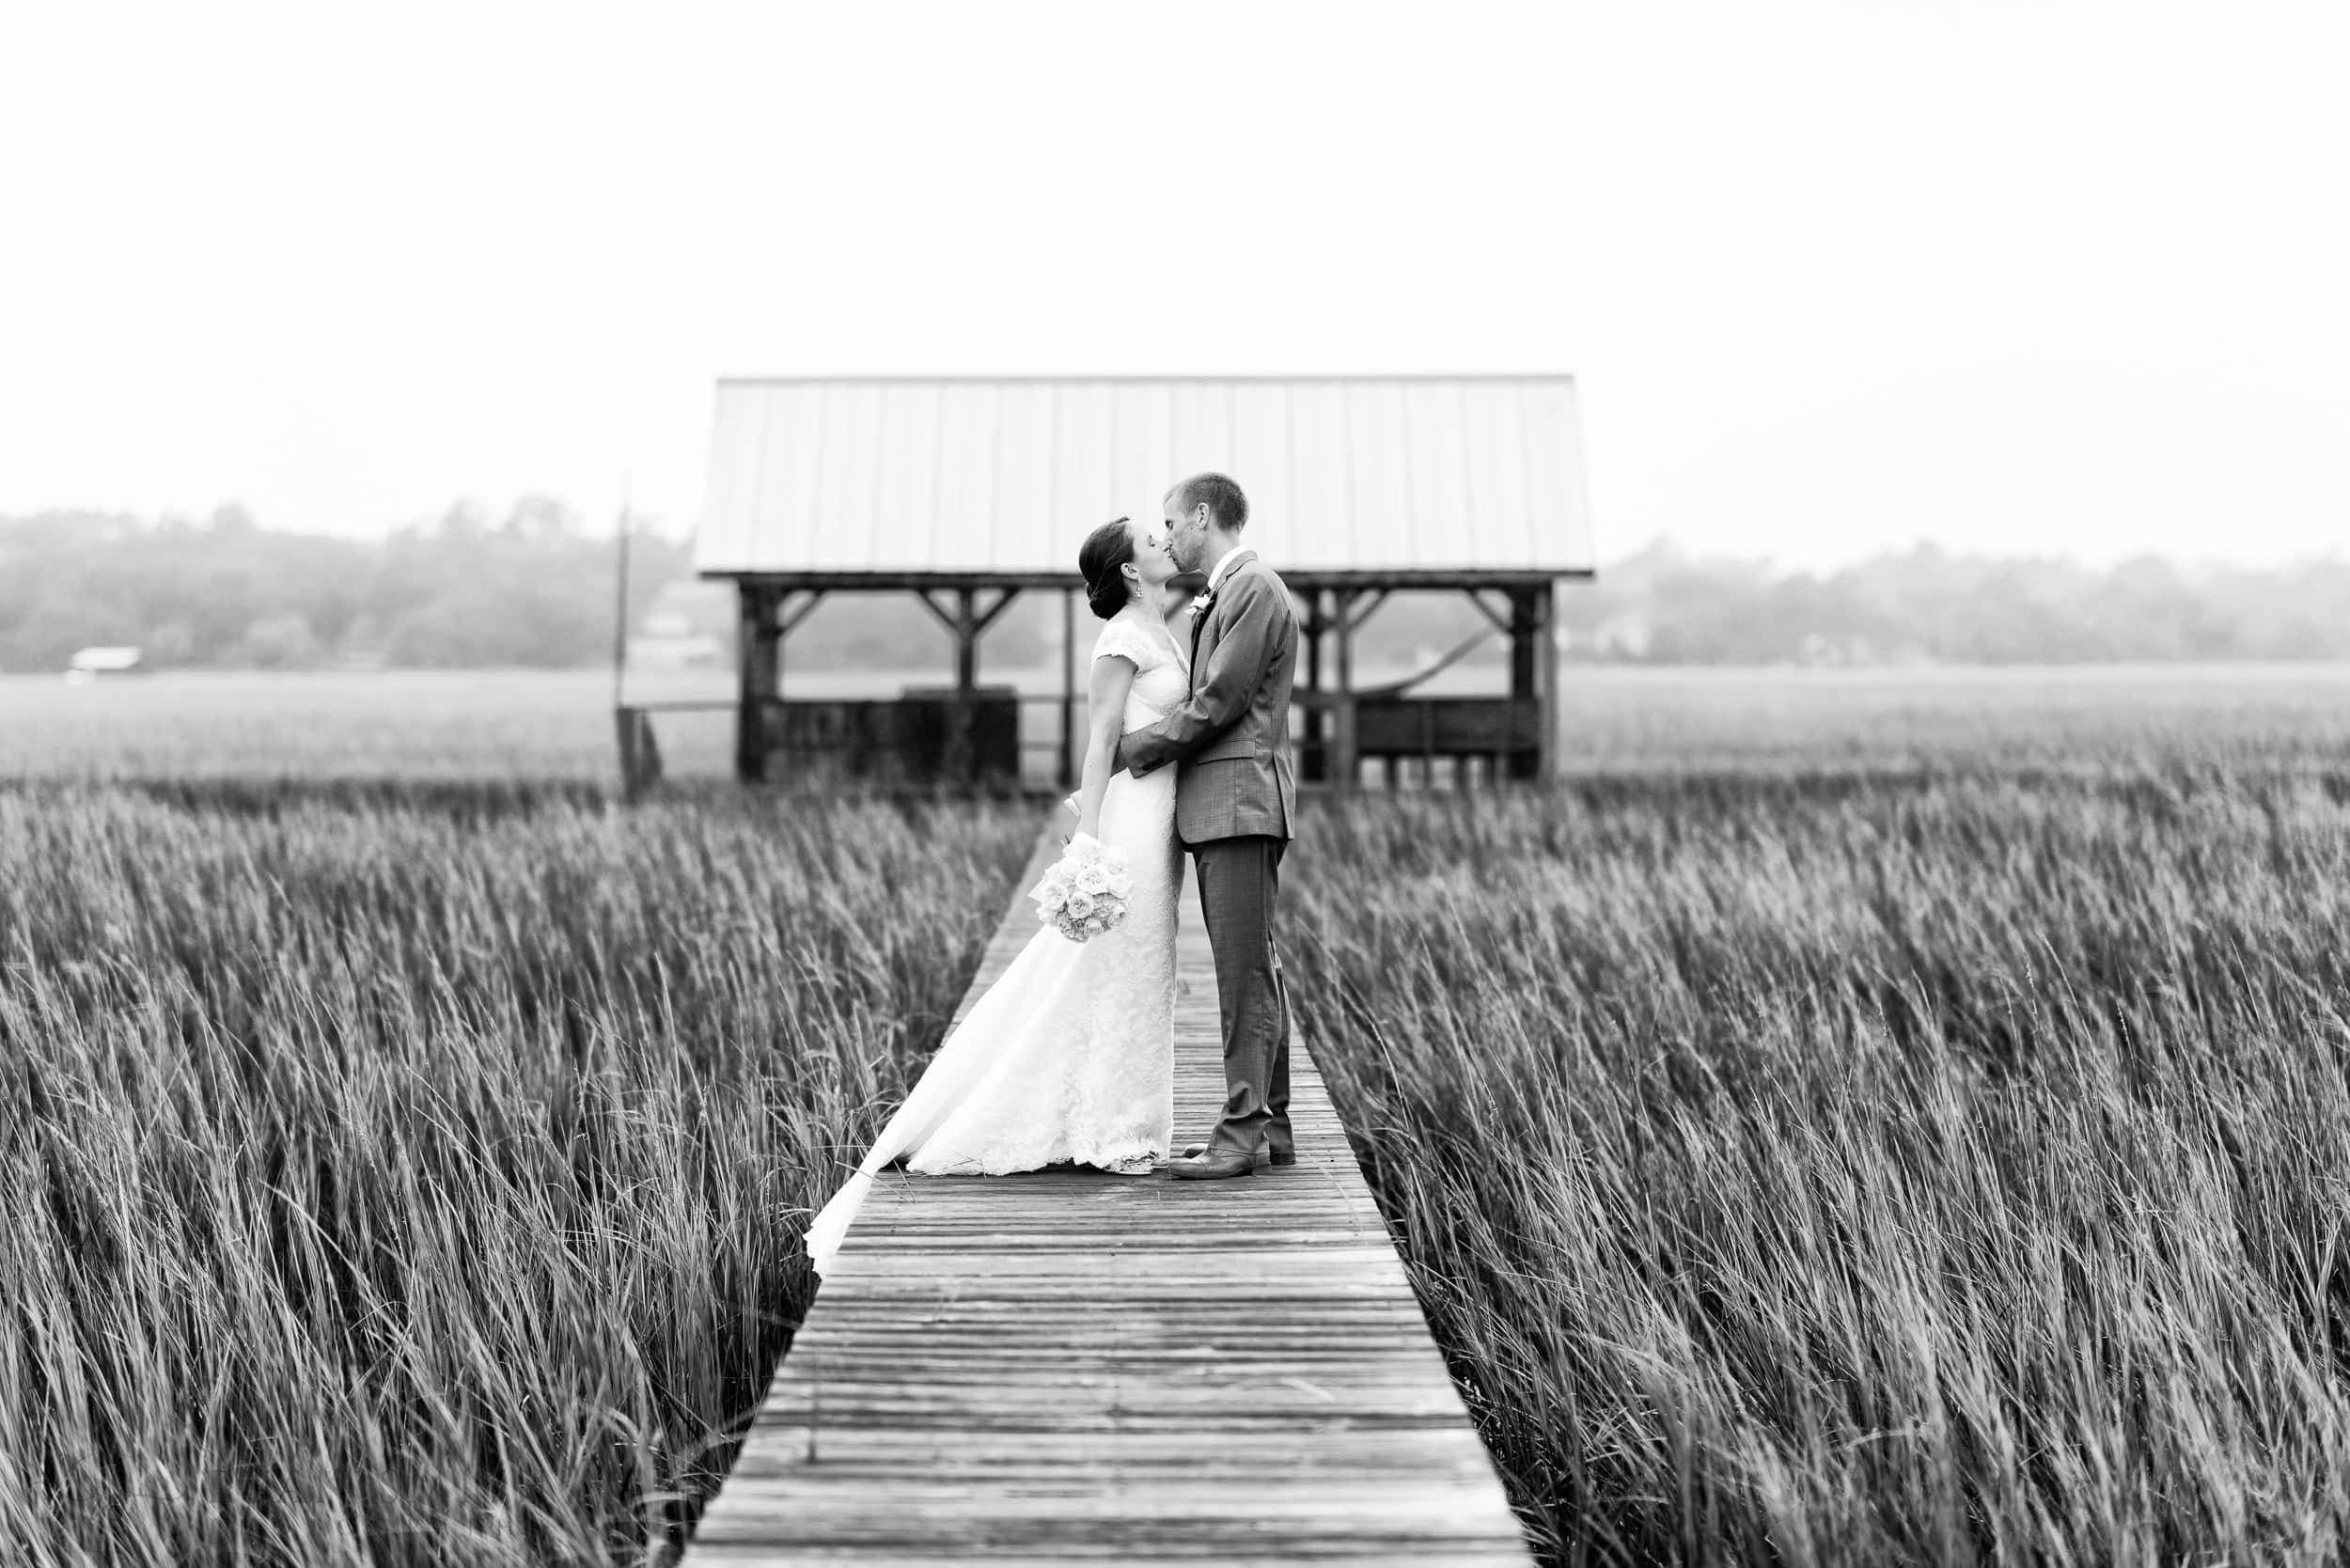 Couple kissing on a marsh walkway in black and white - The Pelican Inn